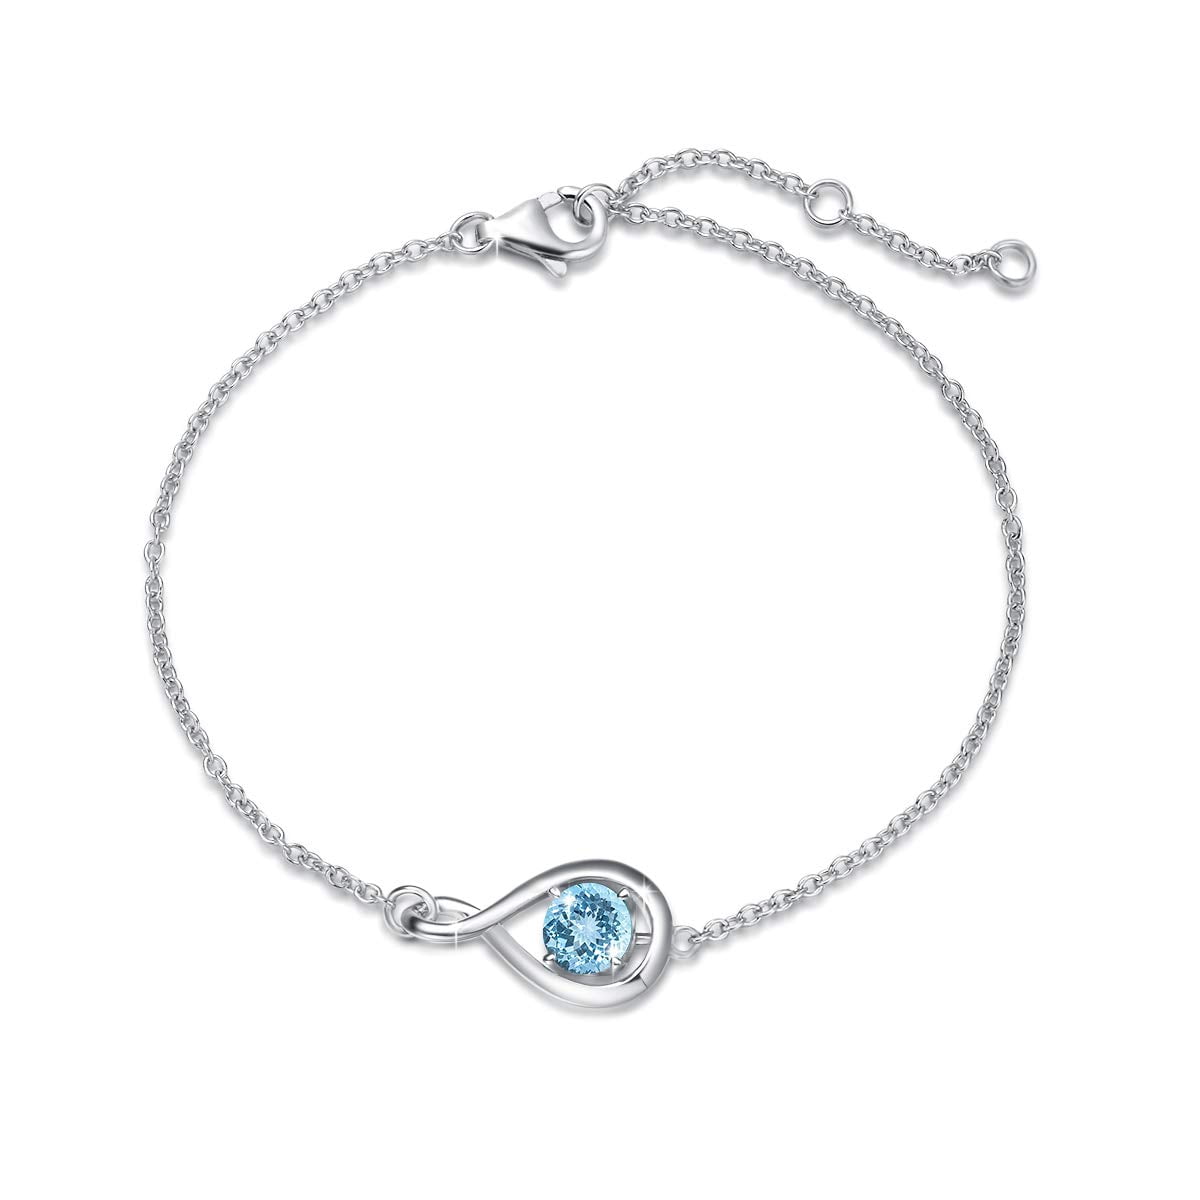 FANCIME 925 Sterling Silver Created Sapphire Dainty Infinity Link